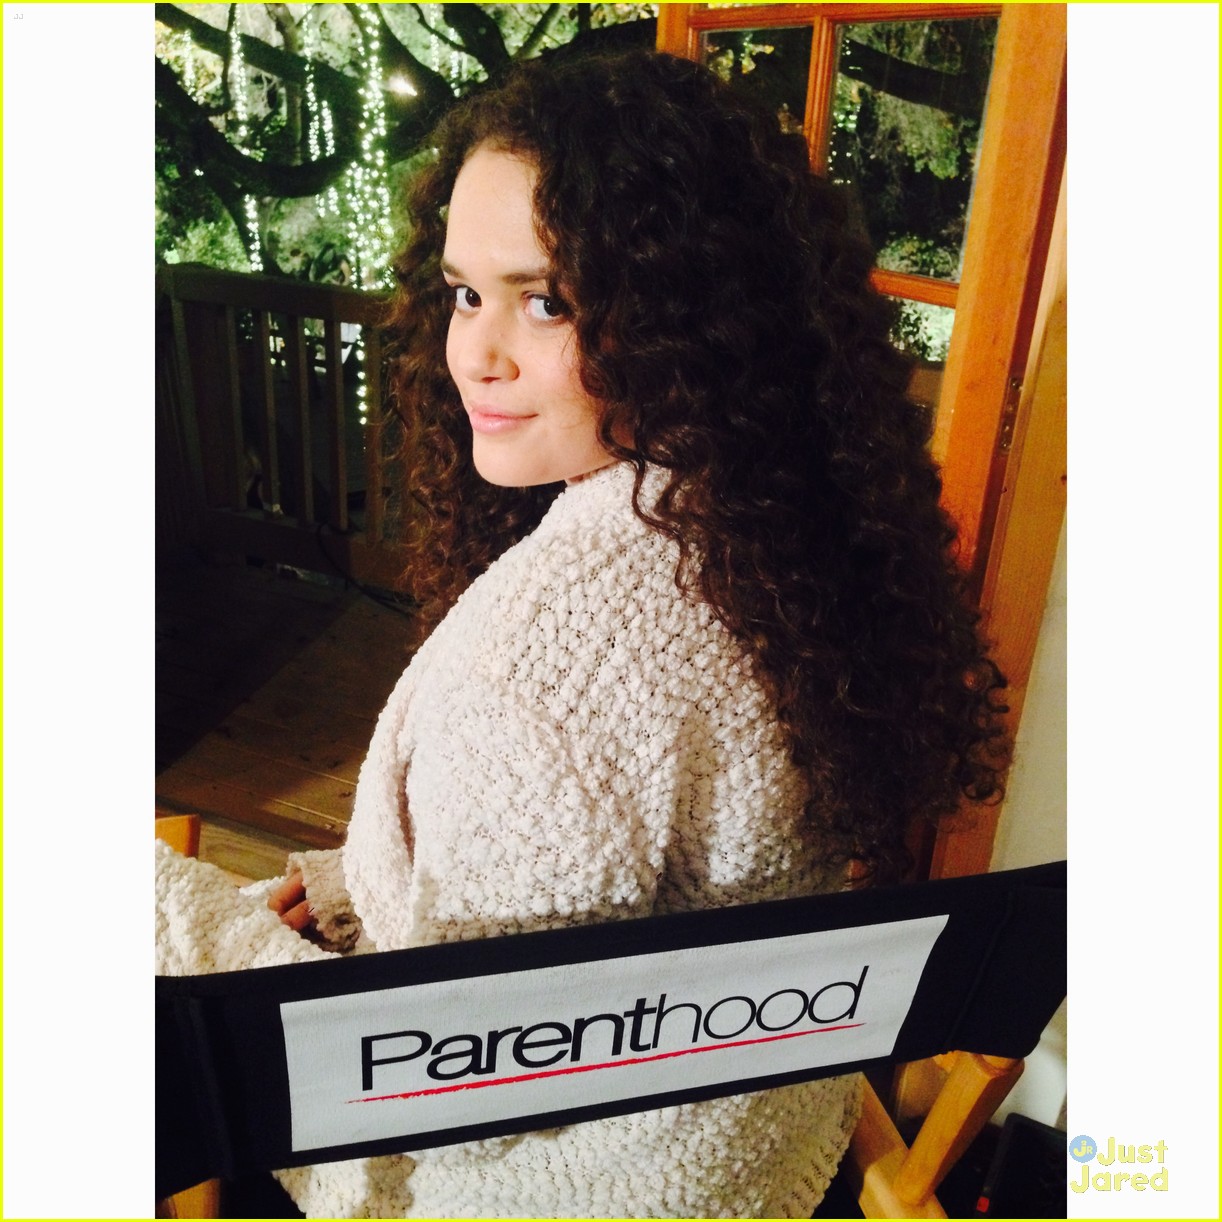 madison pettis parenthood excl quote 01